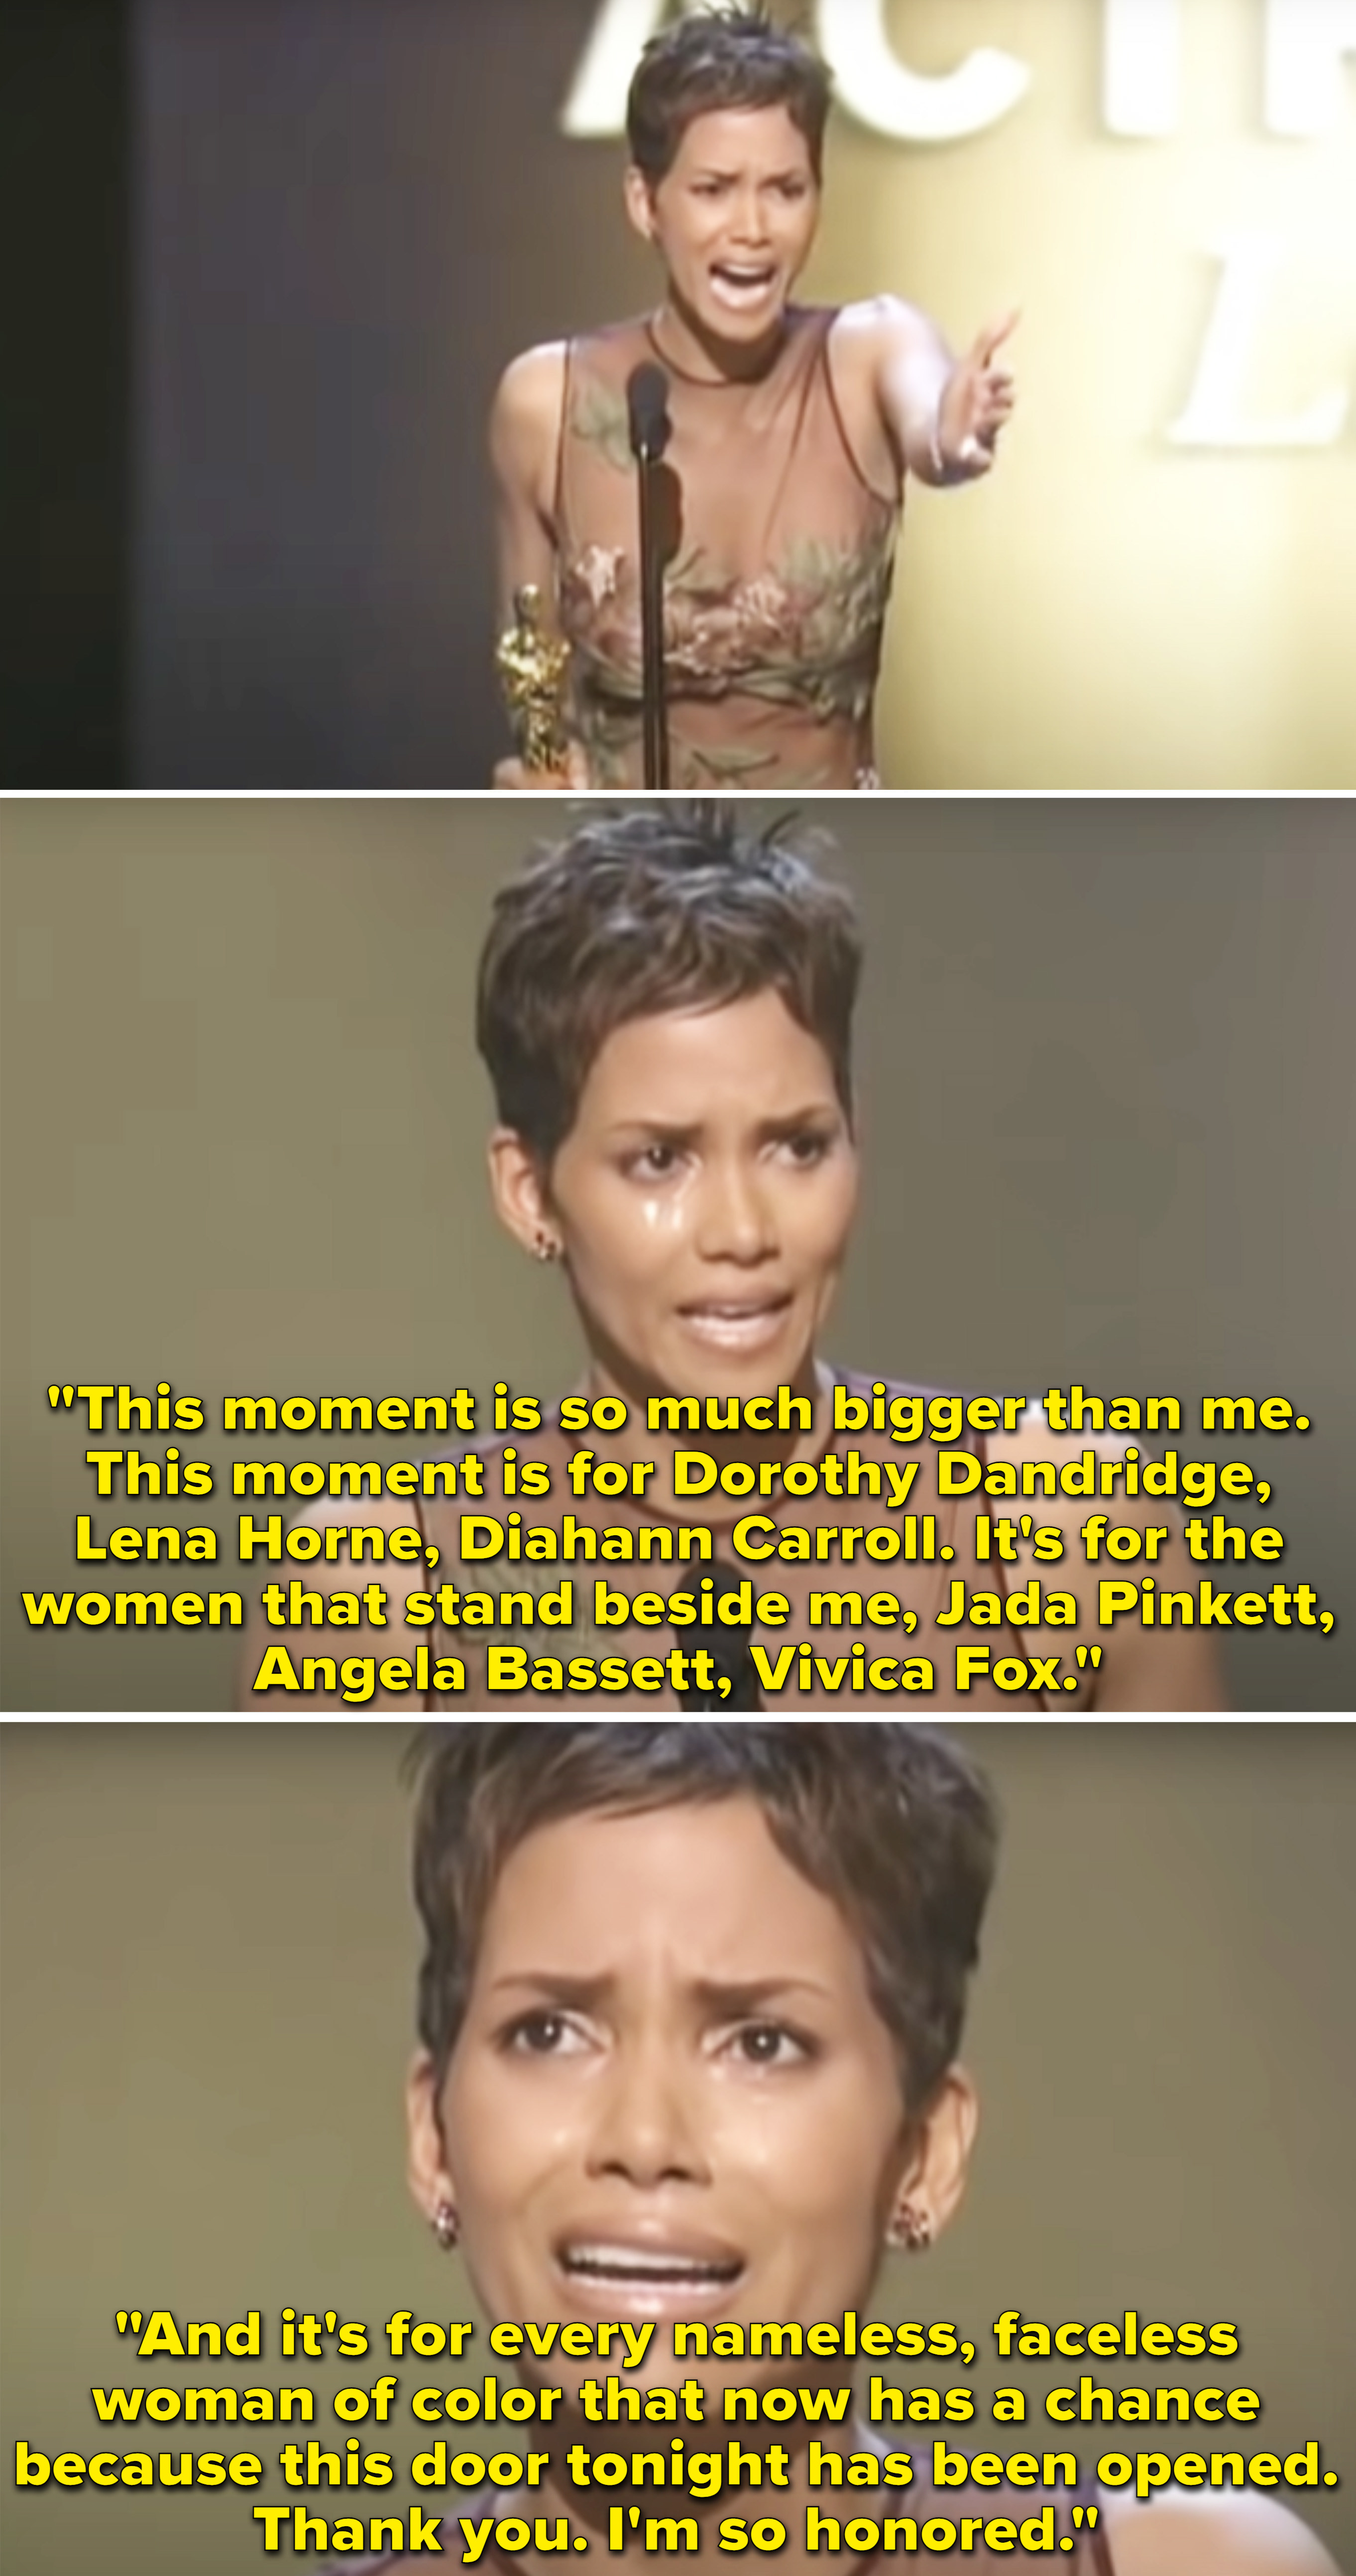 Halle Berry accepting her award and thanking all of the Black actresses who came before her